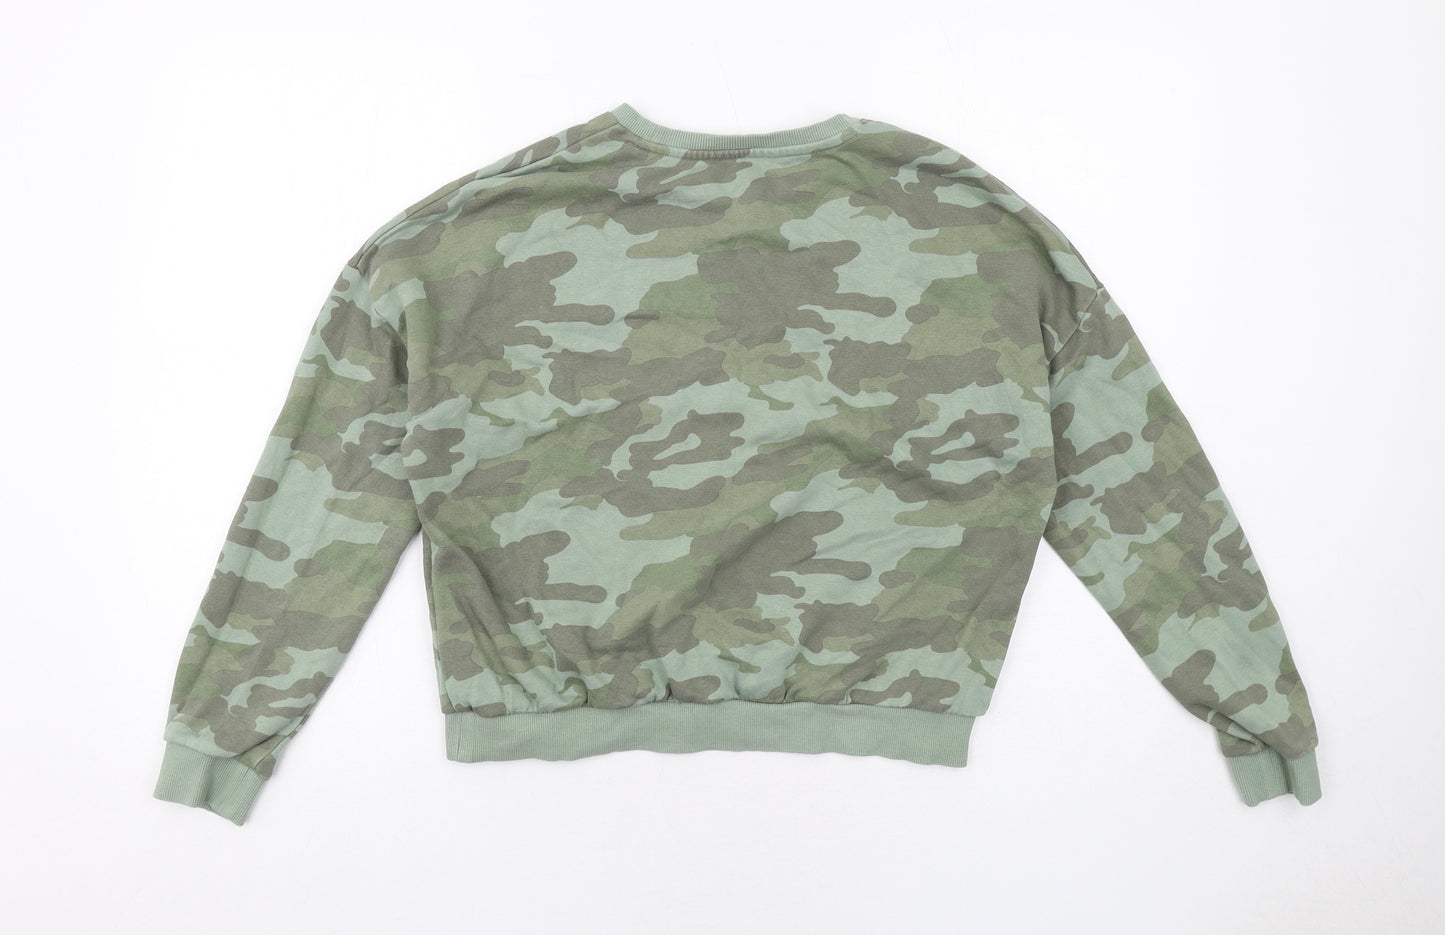 Marks and Spencer Boys Green Camouflage Cotton Pullover Sweatshirt Size 13-14 Years Pullover